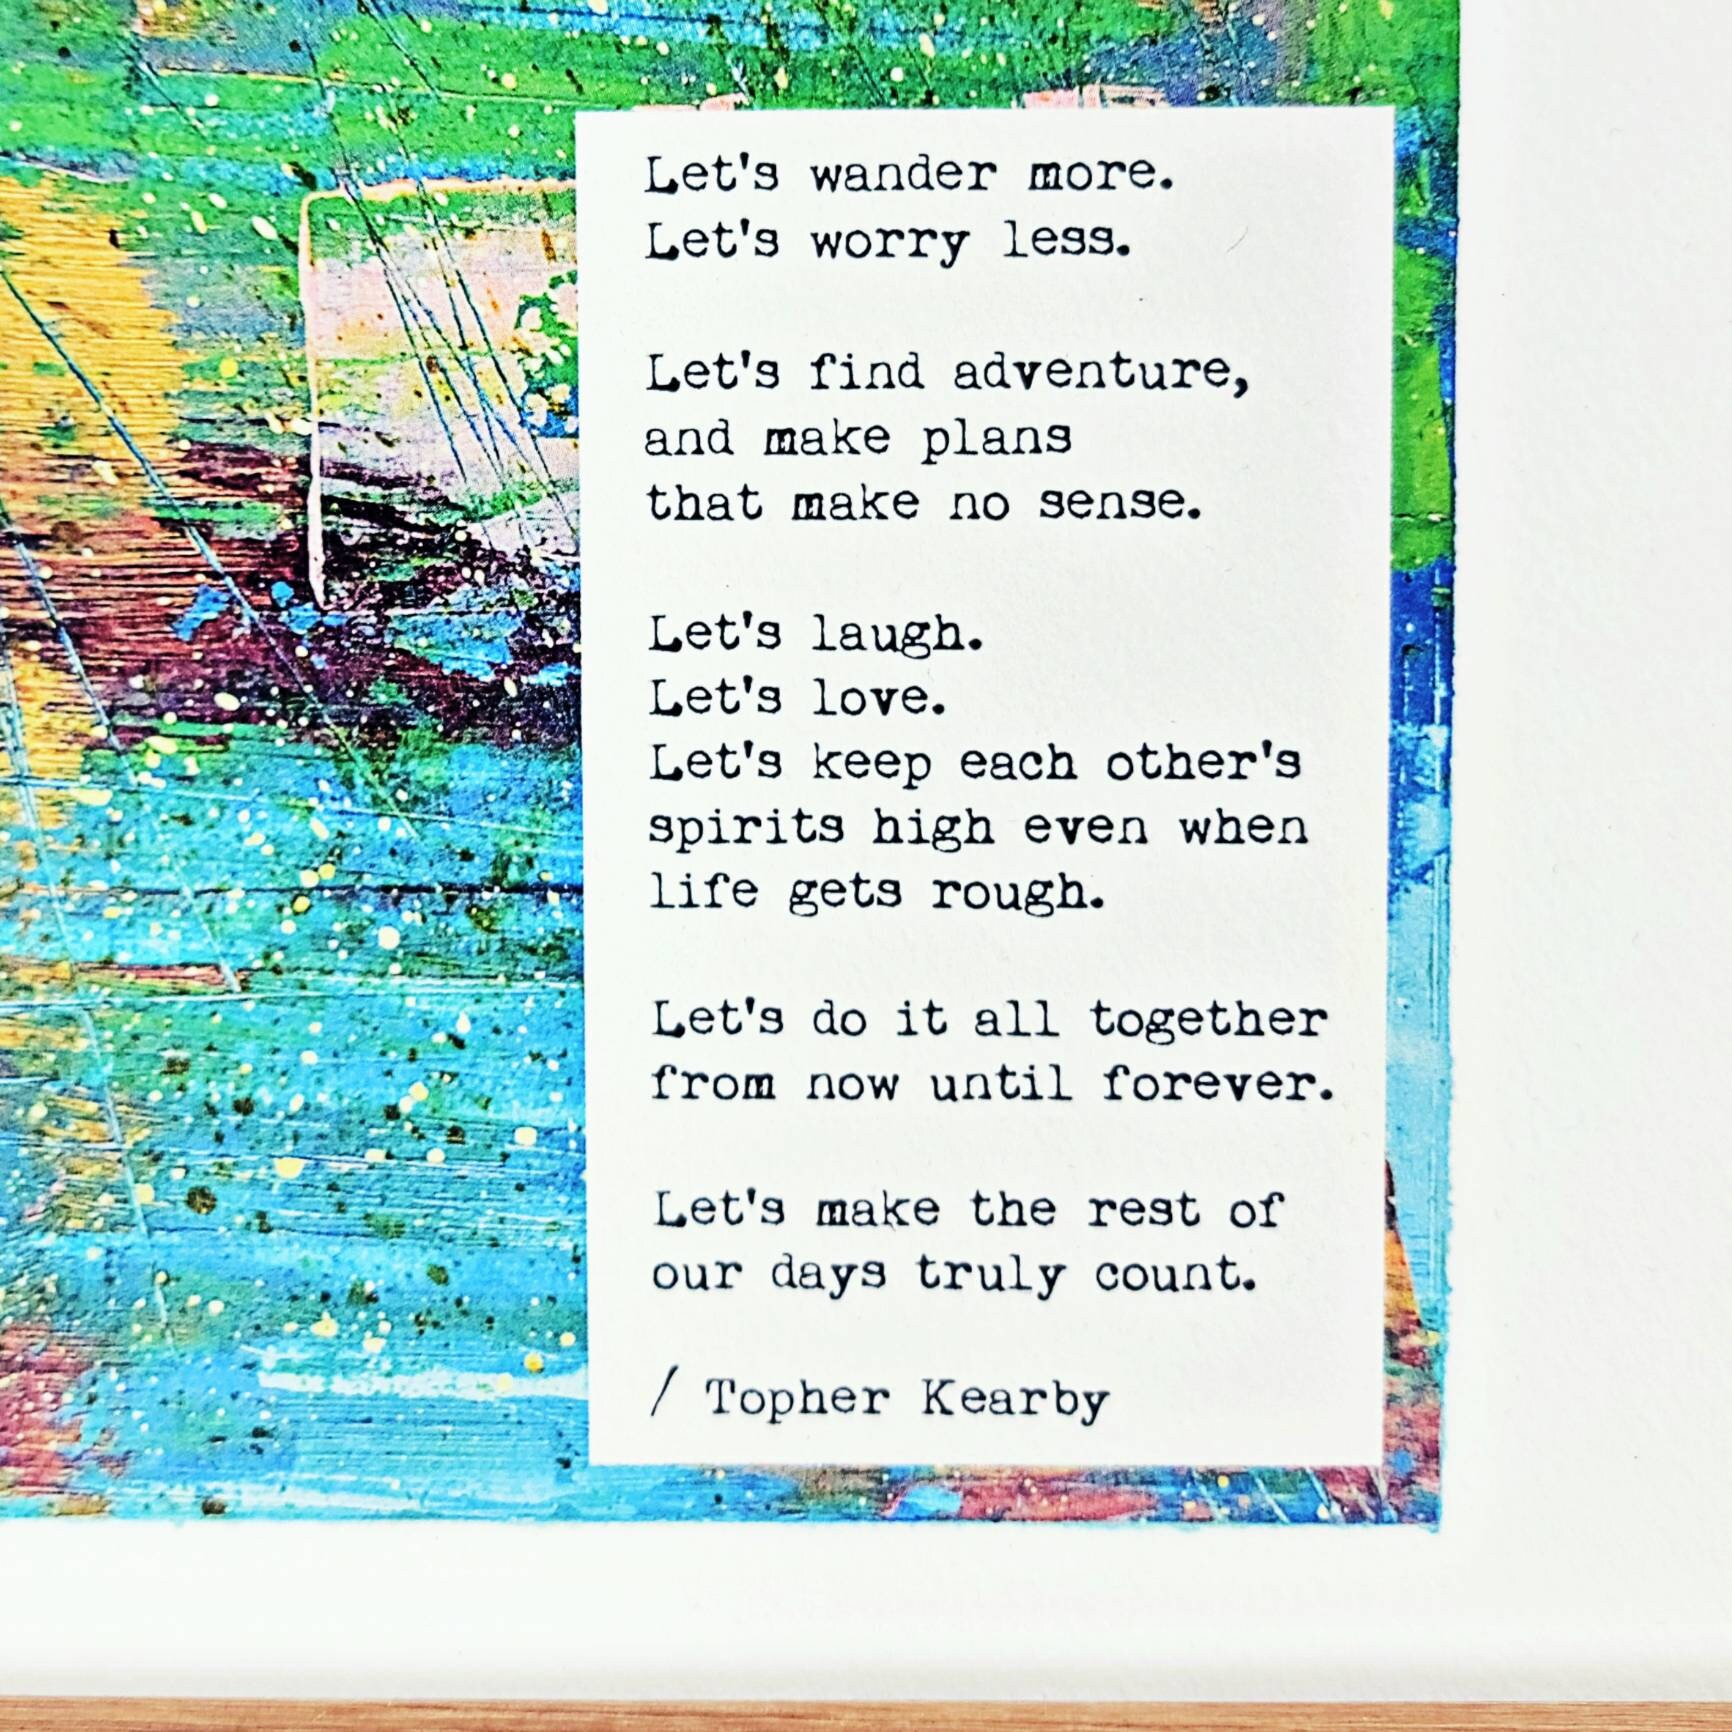 Just Be, With Me echo / Abstract 11x14 Inch Gallery Print watercolor Paper  Topher Kearby Poetry Quote 